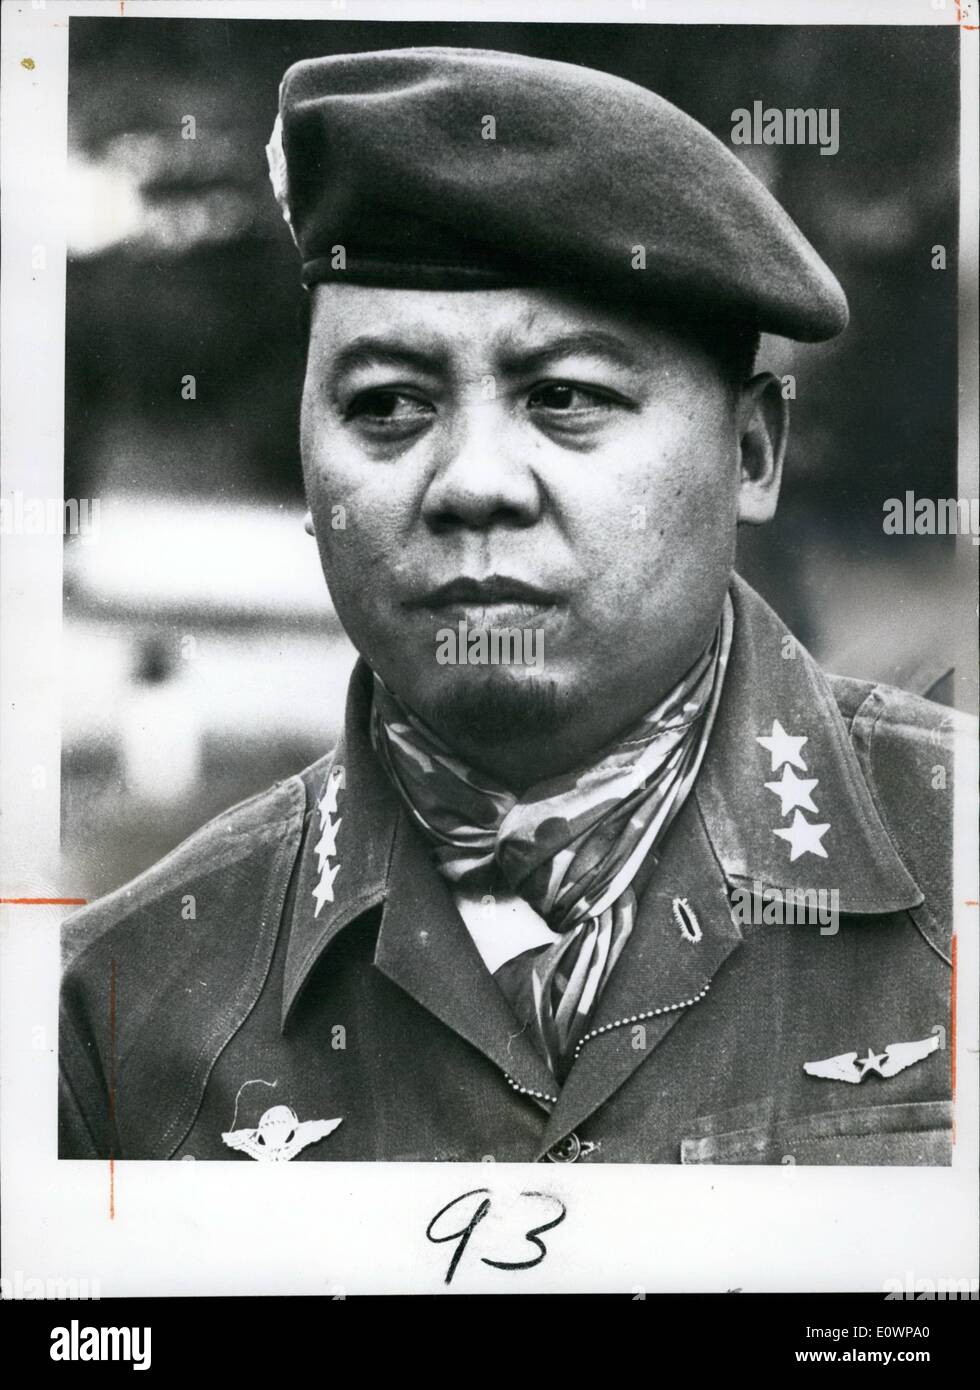 Download preview image - jan-01-1964-major-general-nguyen-khanh-commander-of-the-1st-corps-E0WPA0